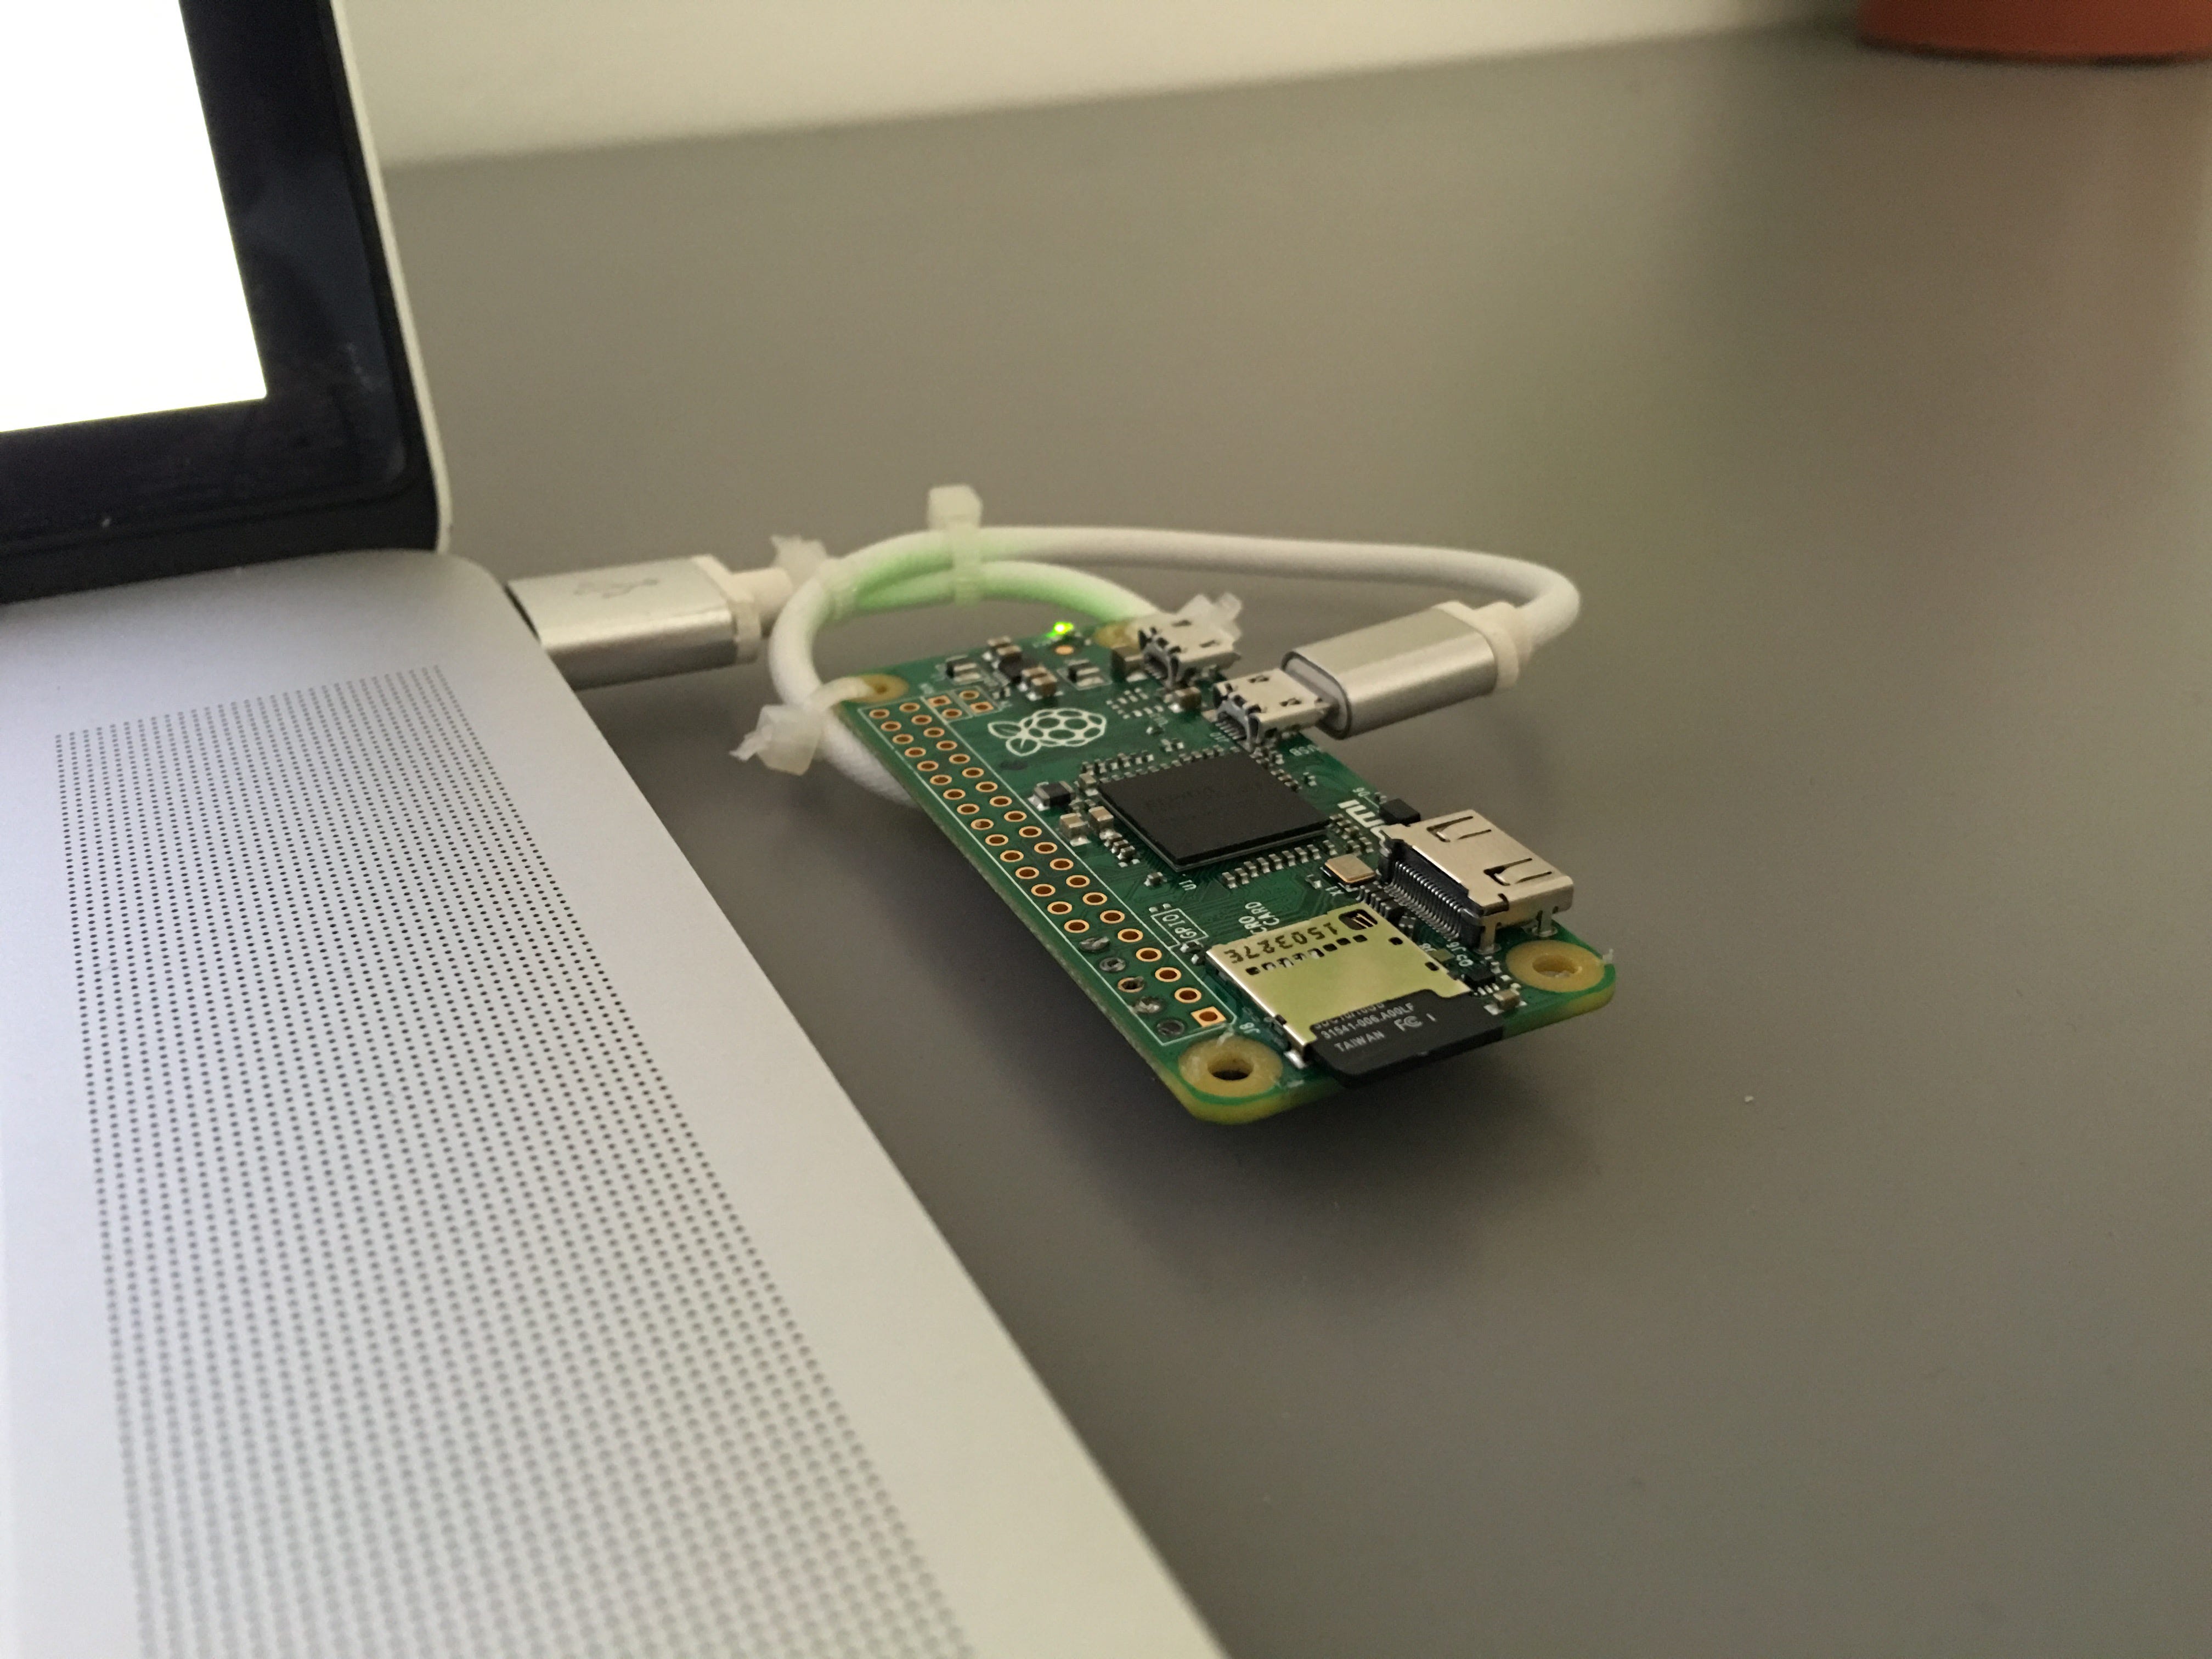 Connect to Your Raspberry Pi Over USB Using Gadget Mode